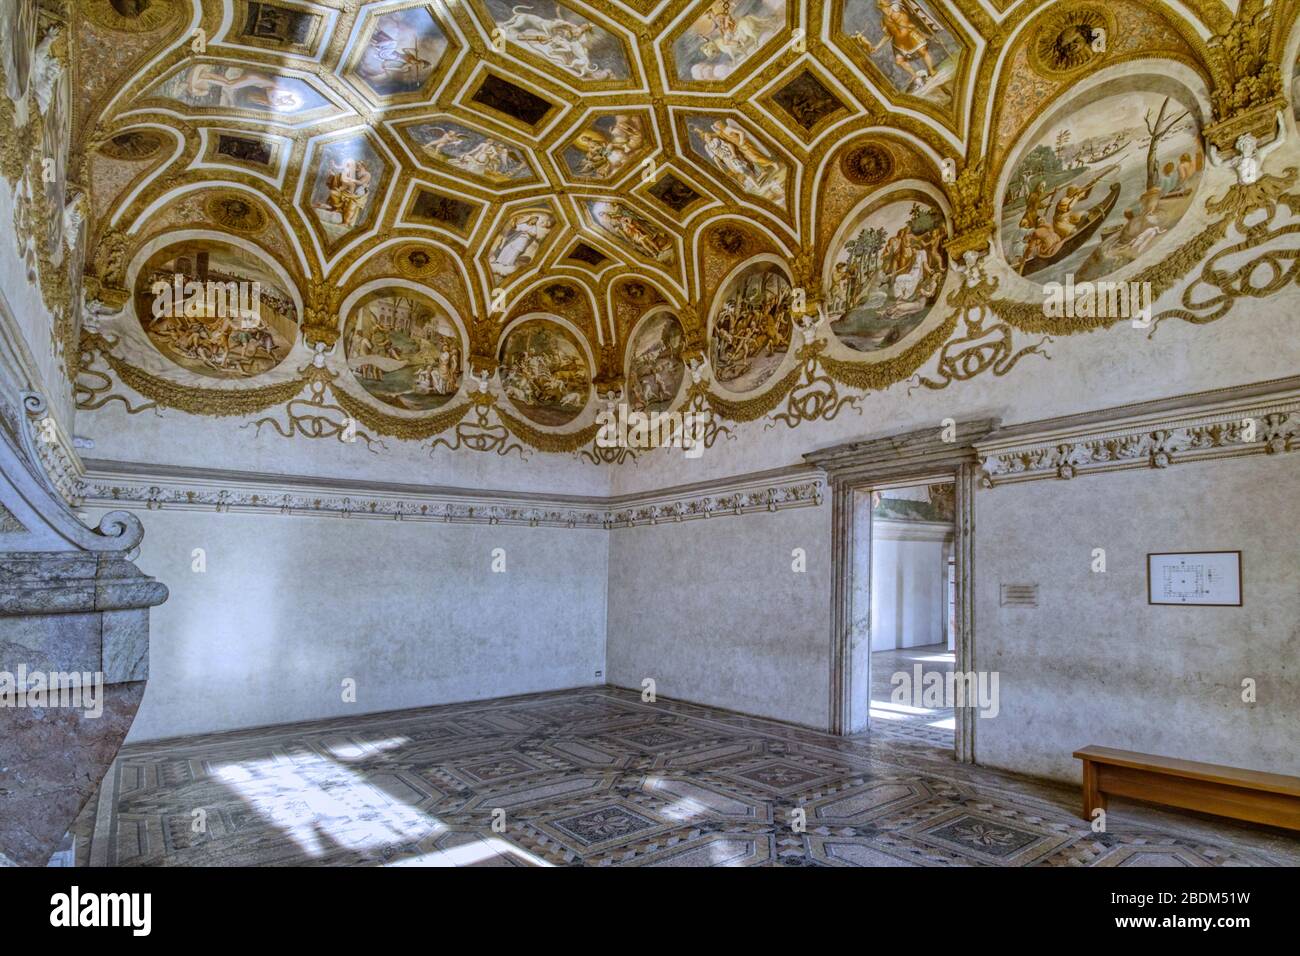 Palazzo Te (16th century) Mantua, Italy. The Chamber of the Winds owes its name to the masks of the personified winds in the lower part of the vault. Stock Photo